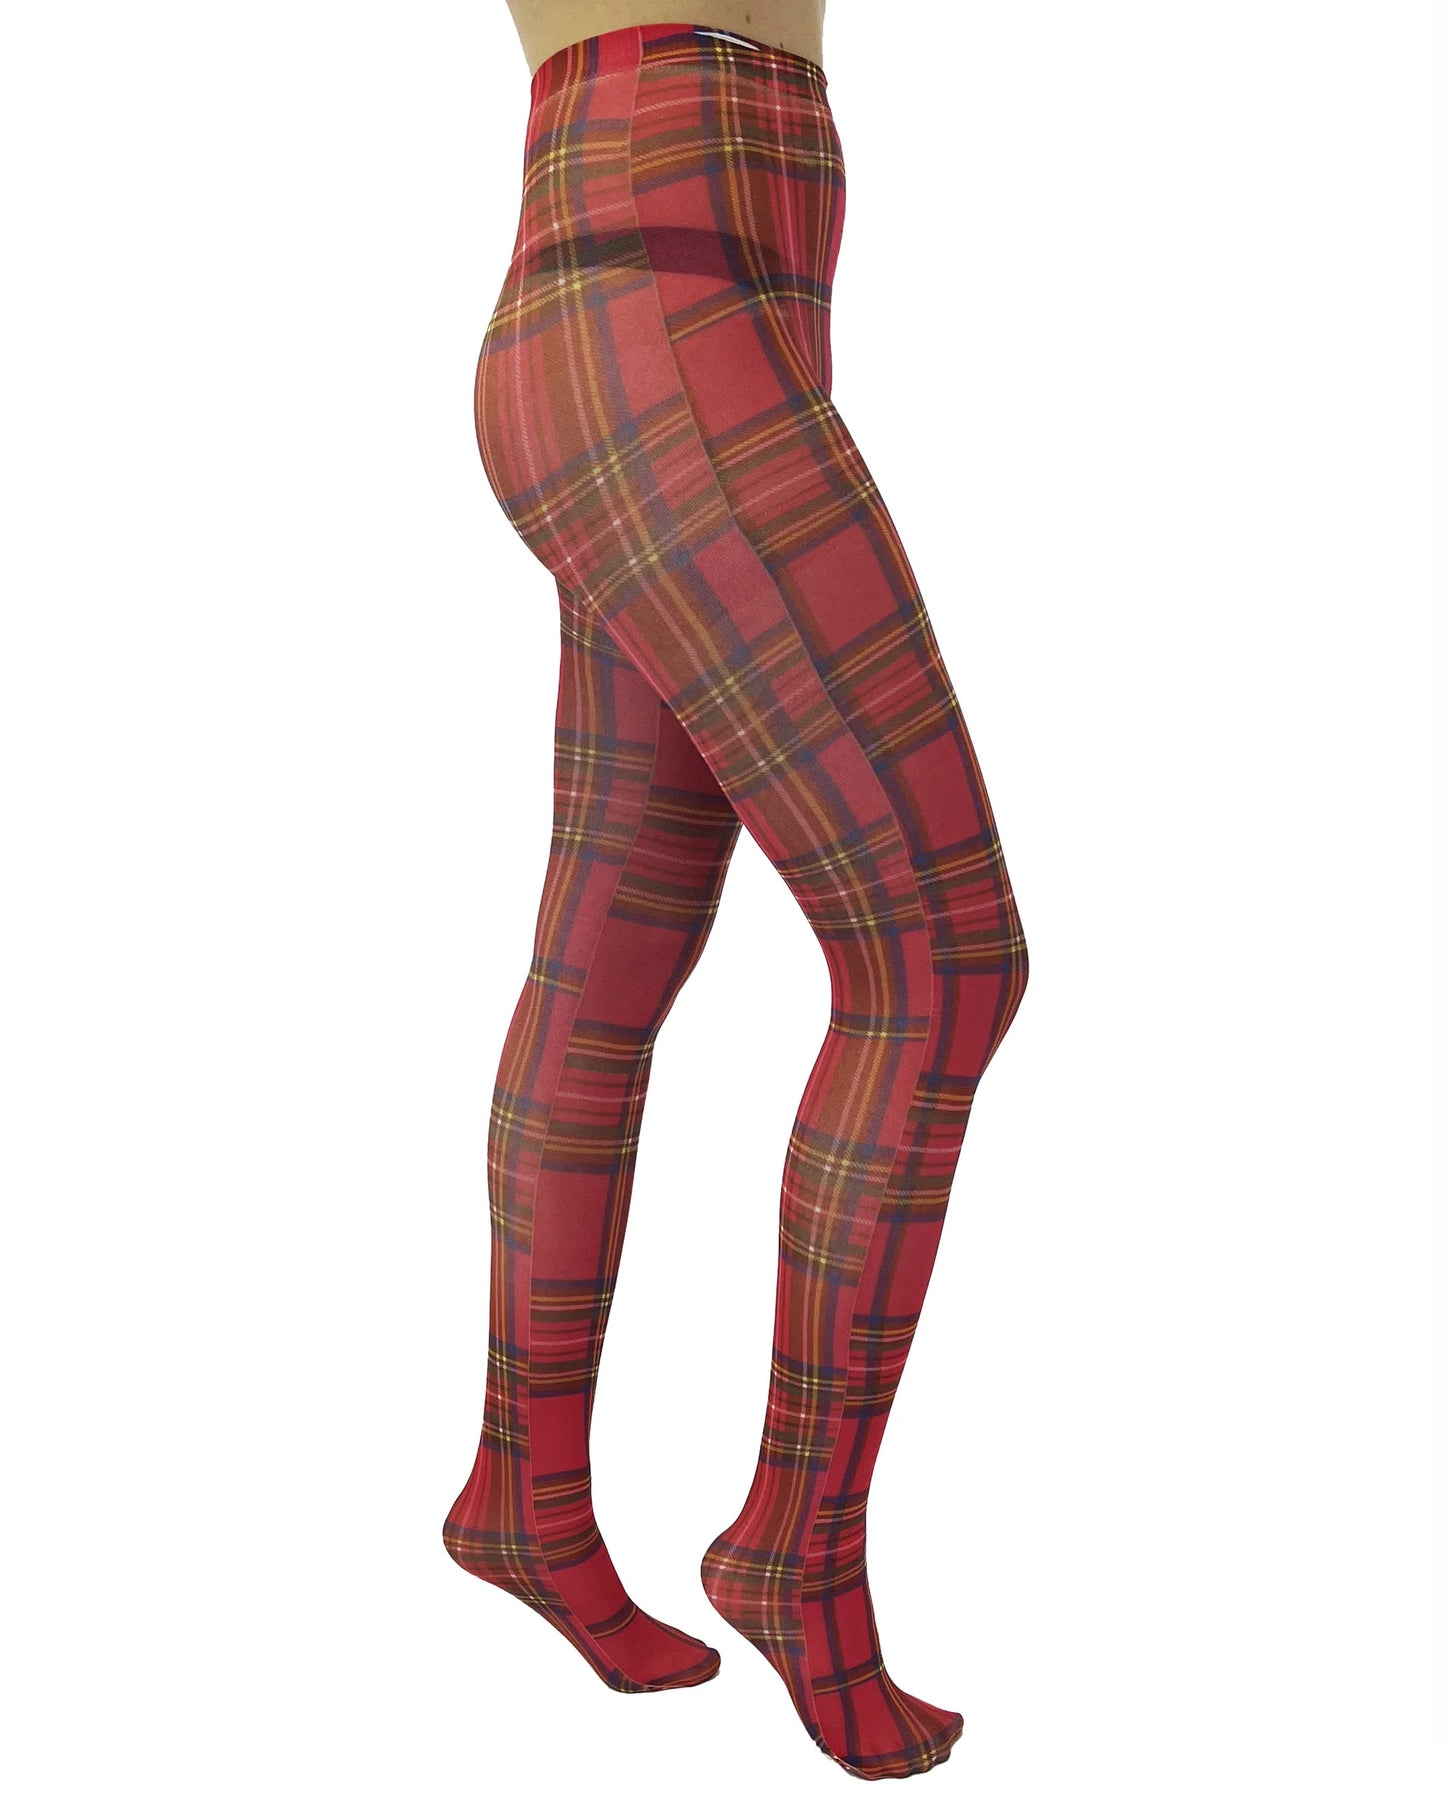 Pamela Mann Red Tartan Tights - White opaque fashion tights with a red tradition style plaid print, side view.